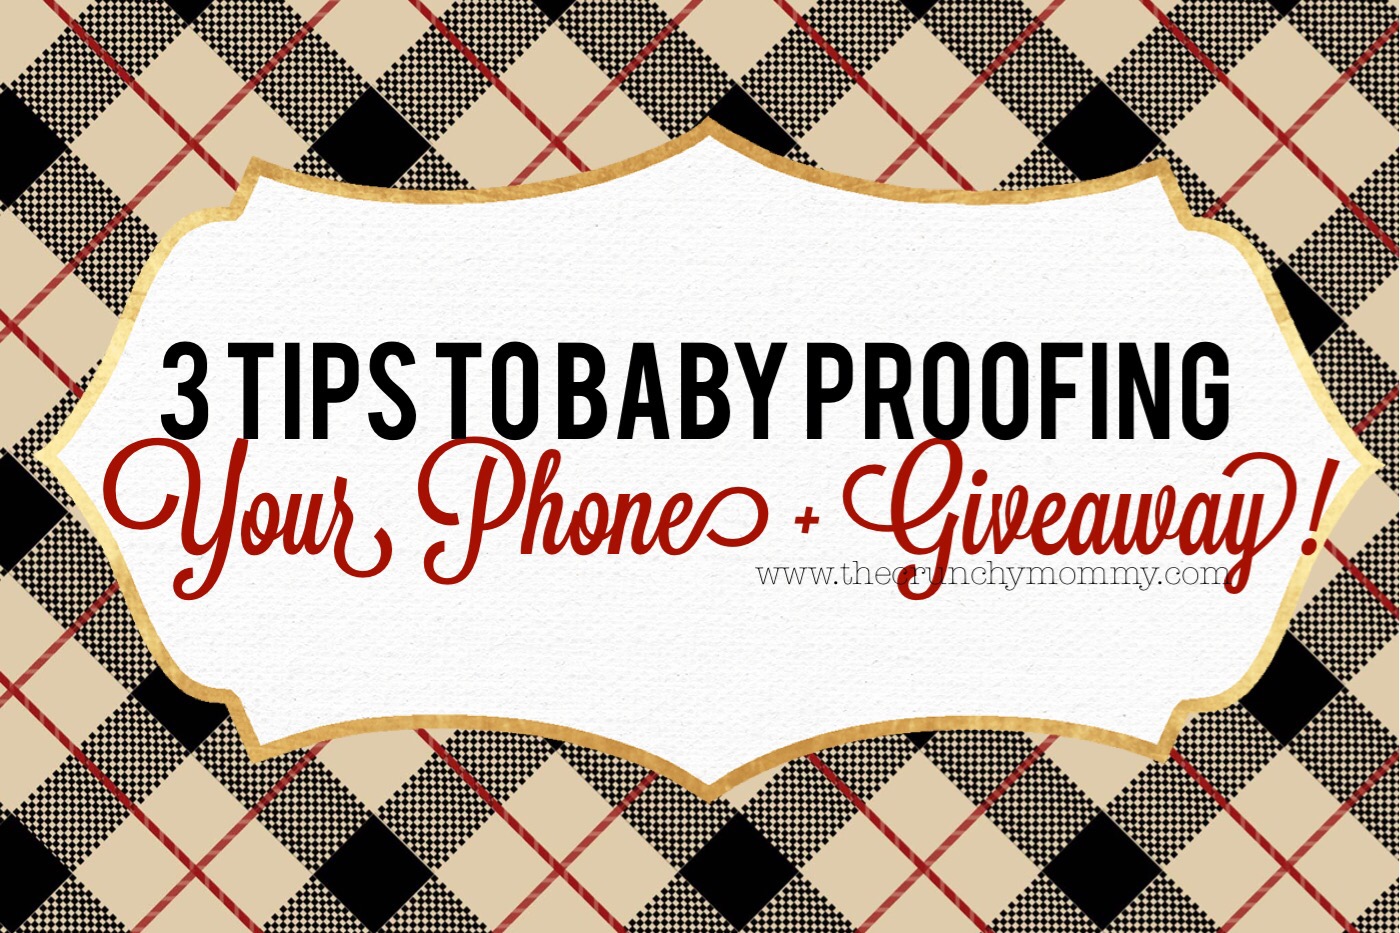 3 Tips to Baby-Proofing Your Phone